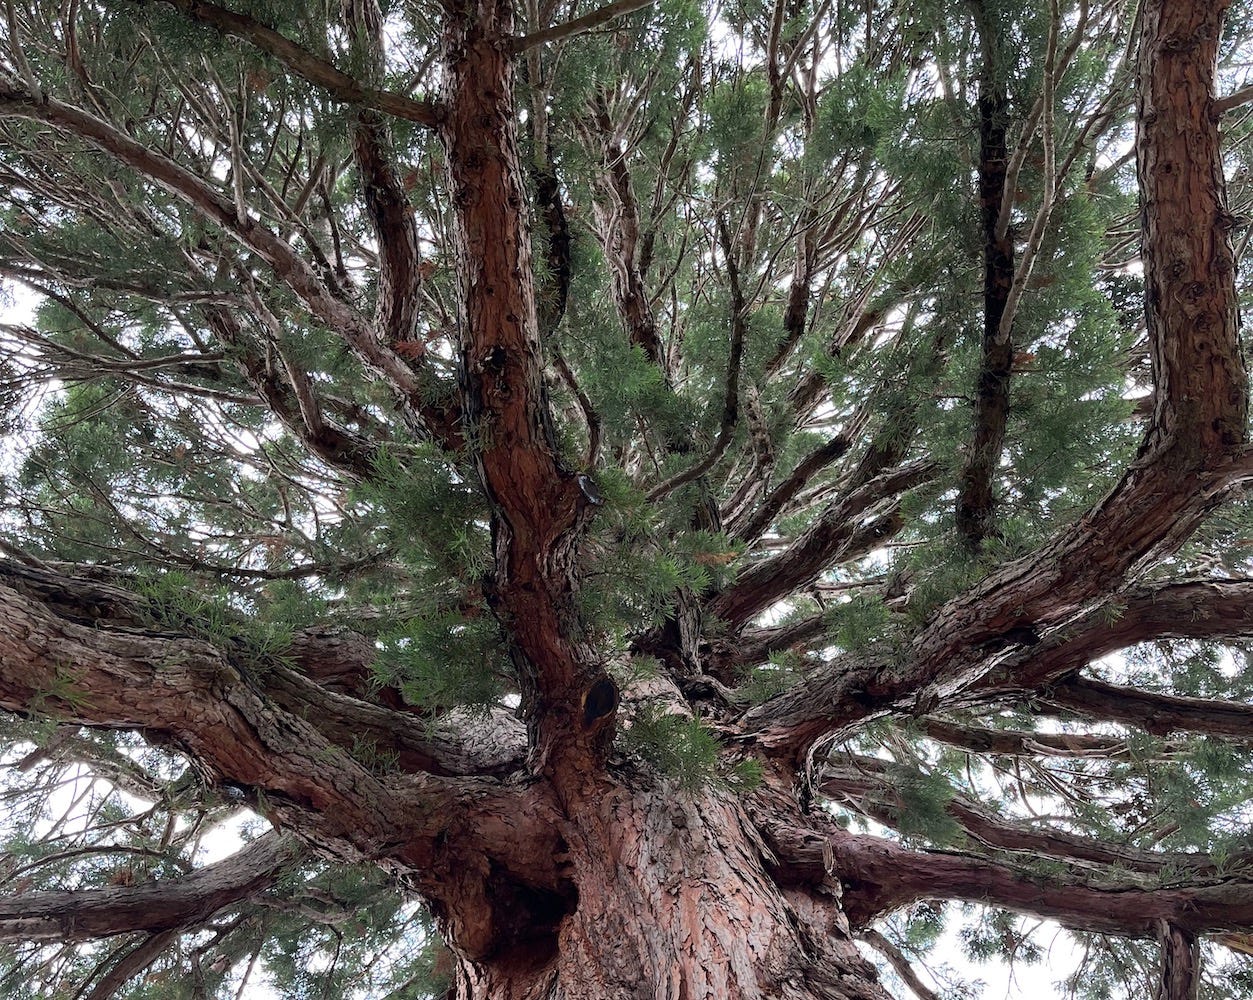 A photo of a sequoia tree, taken at the foot of the trunk looking up. The bark is a deeply textured reddish-brown, and the branches, with their delicate needles, spiral out in all directions, receding up into the light sky.